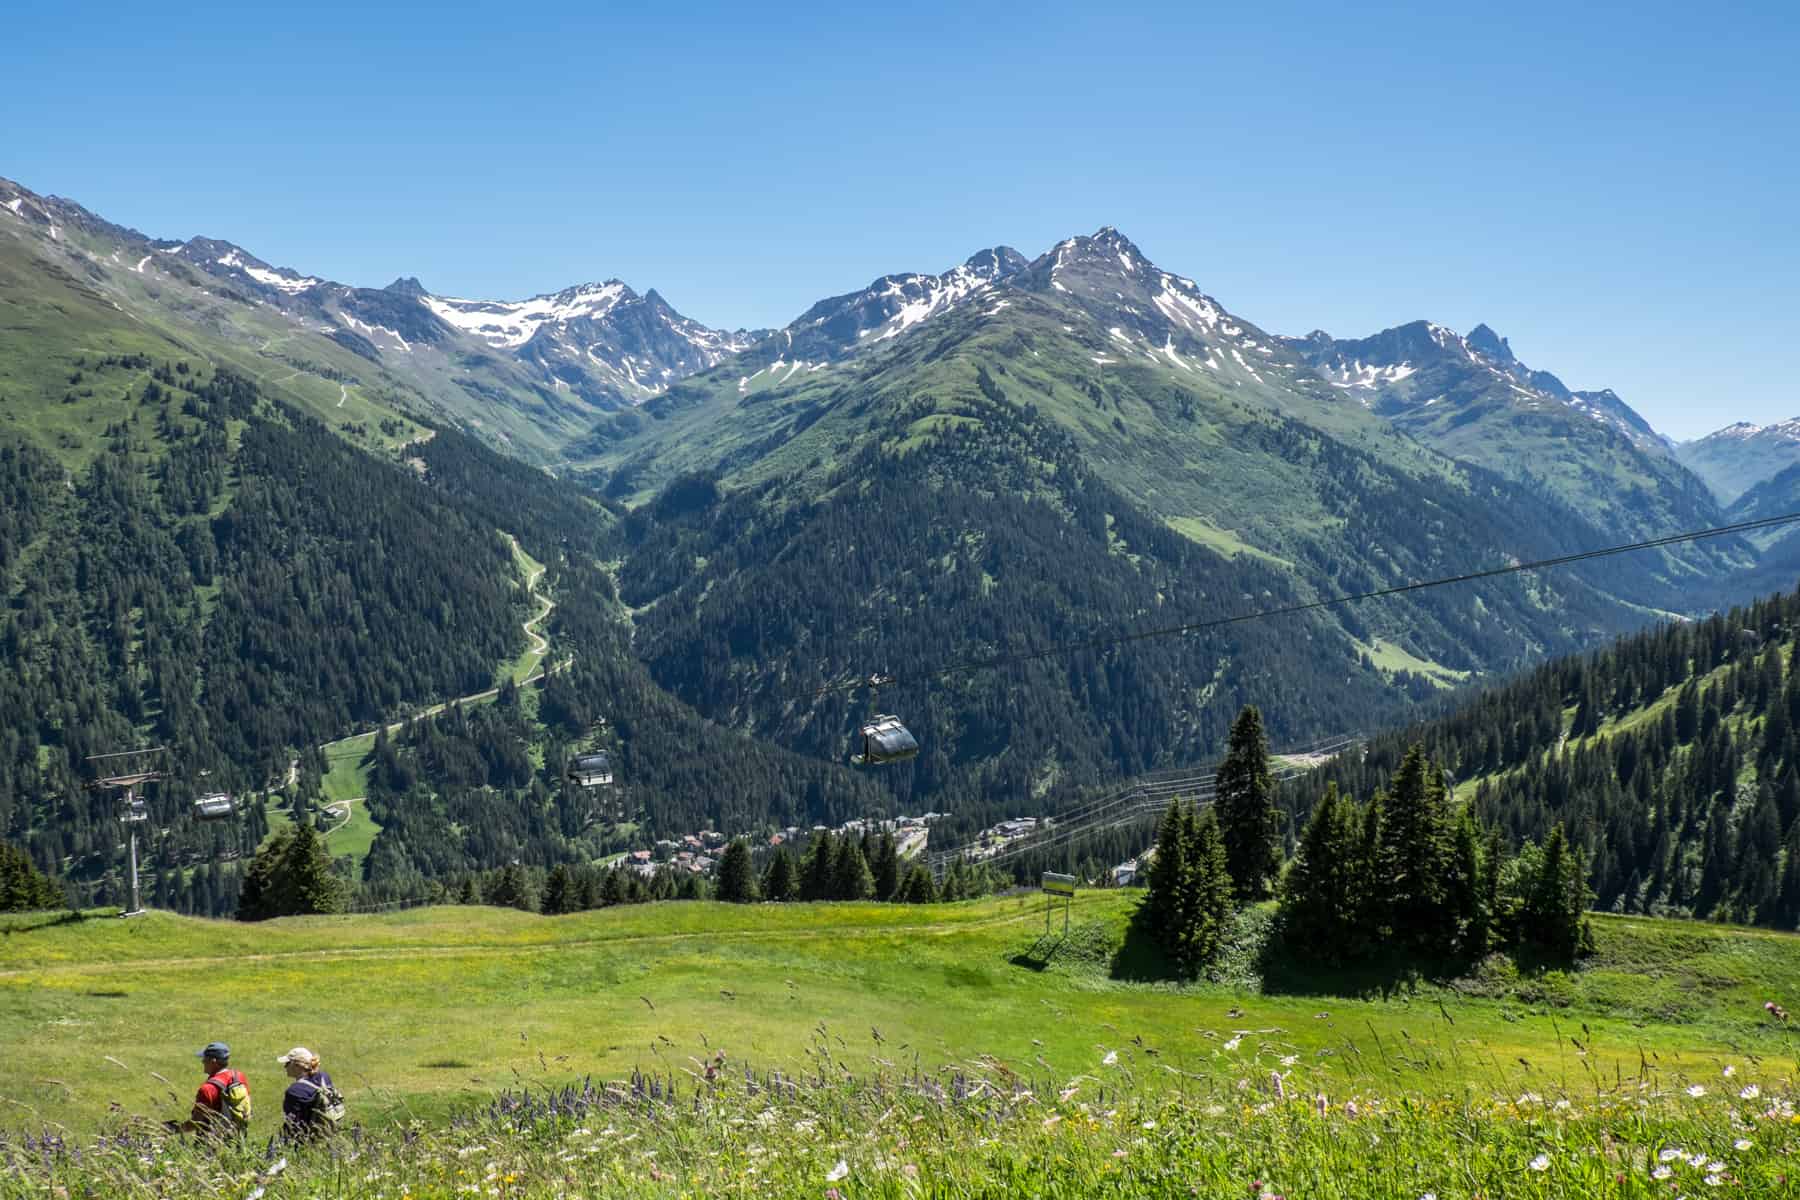 Two hikers start their descent on a green mountain trail in St. Anton am Arlberg with the jagged Austrian Alps the background